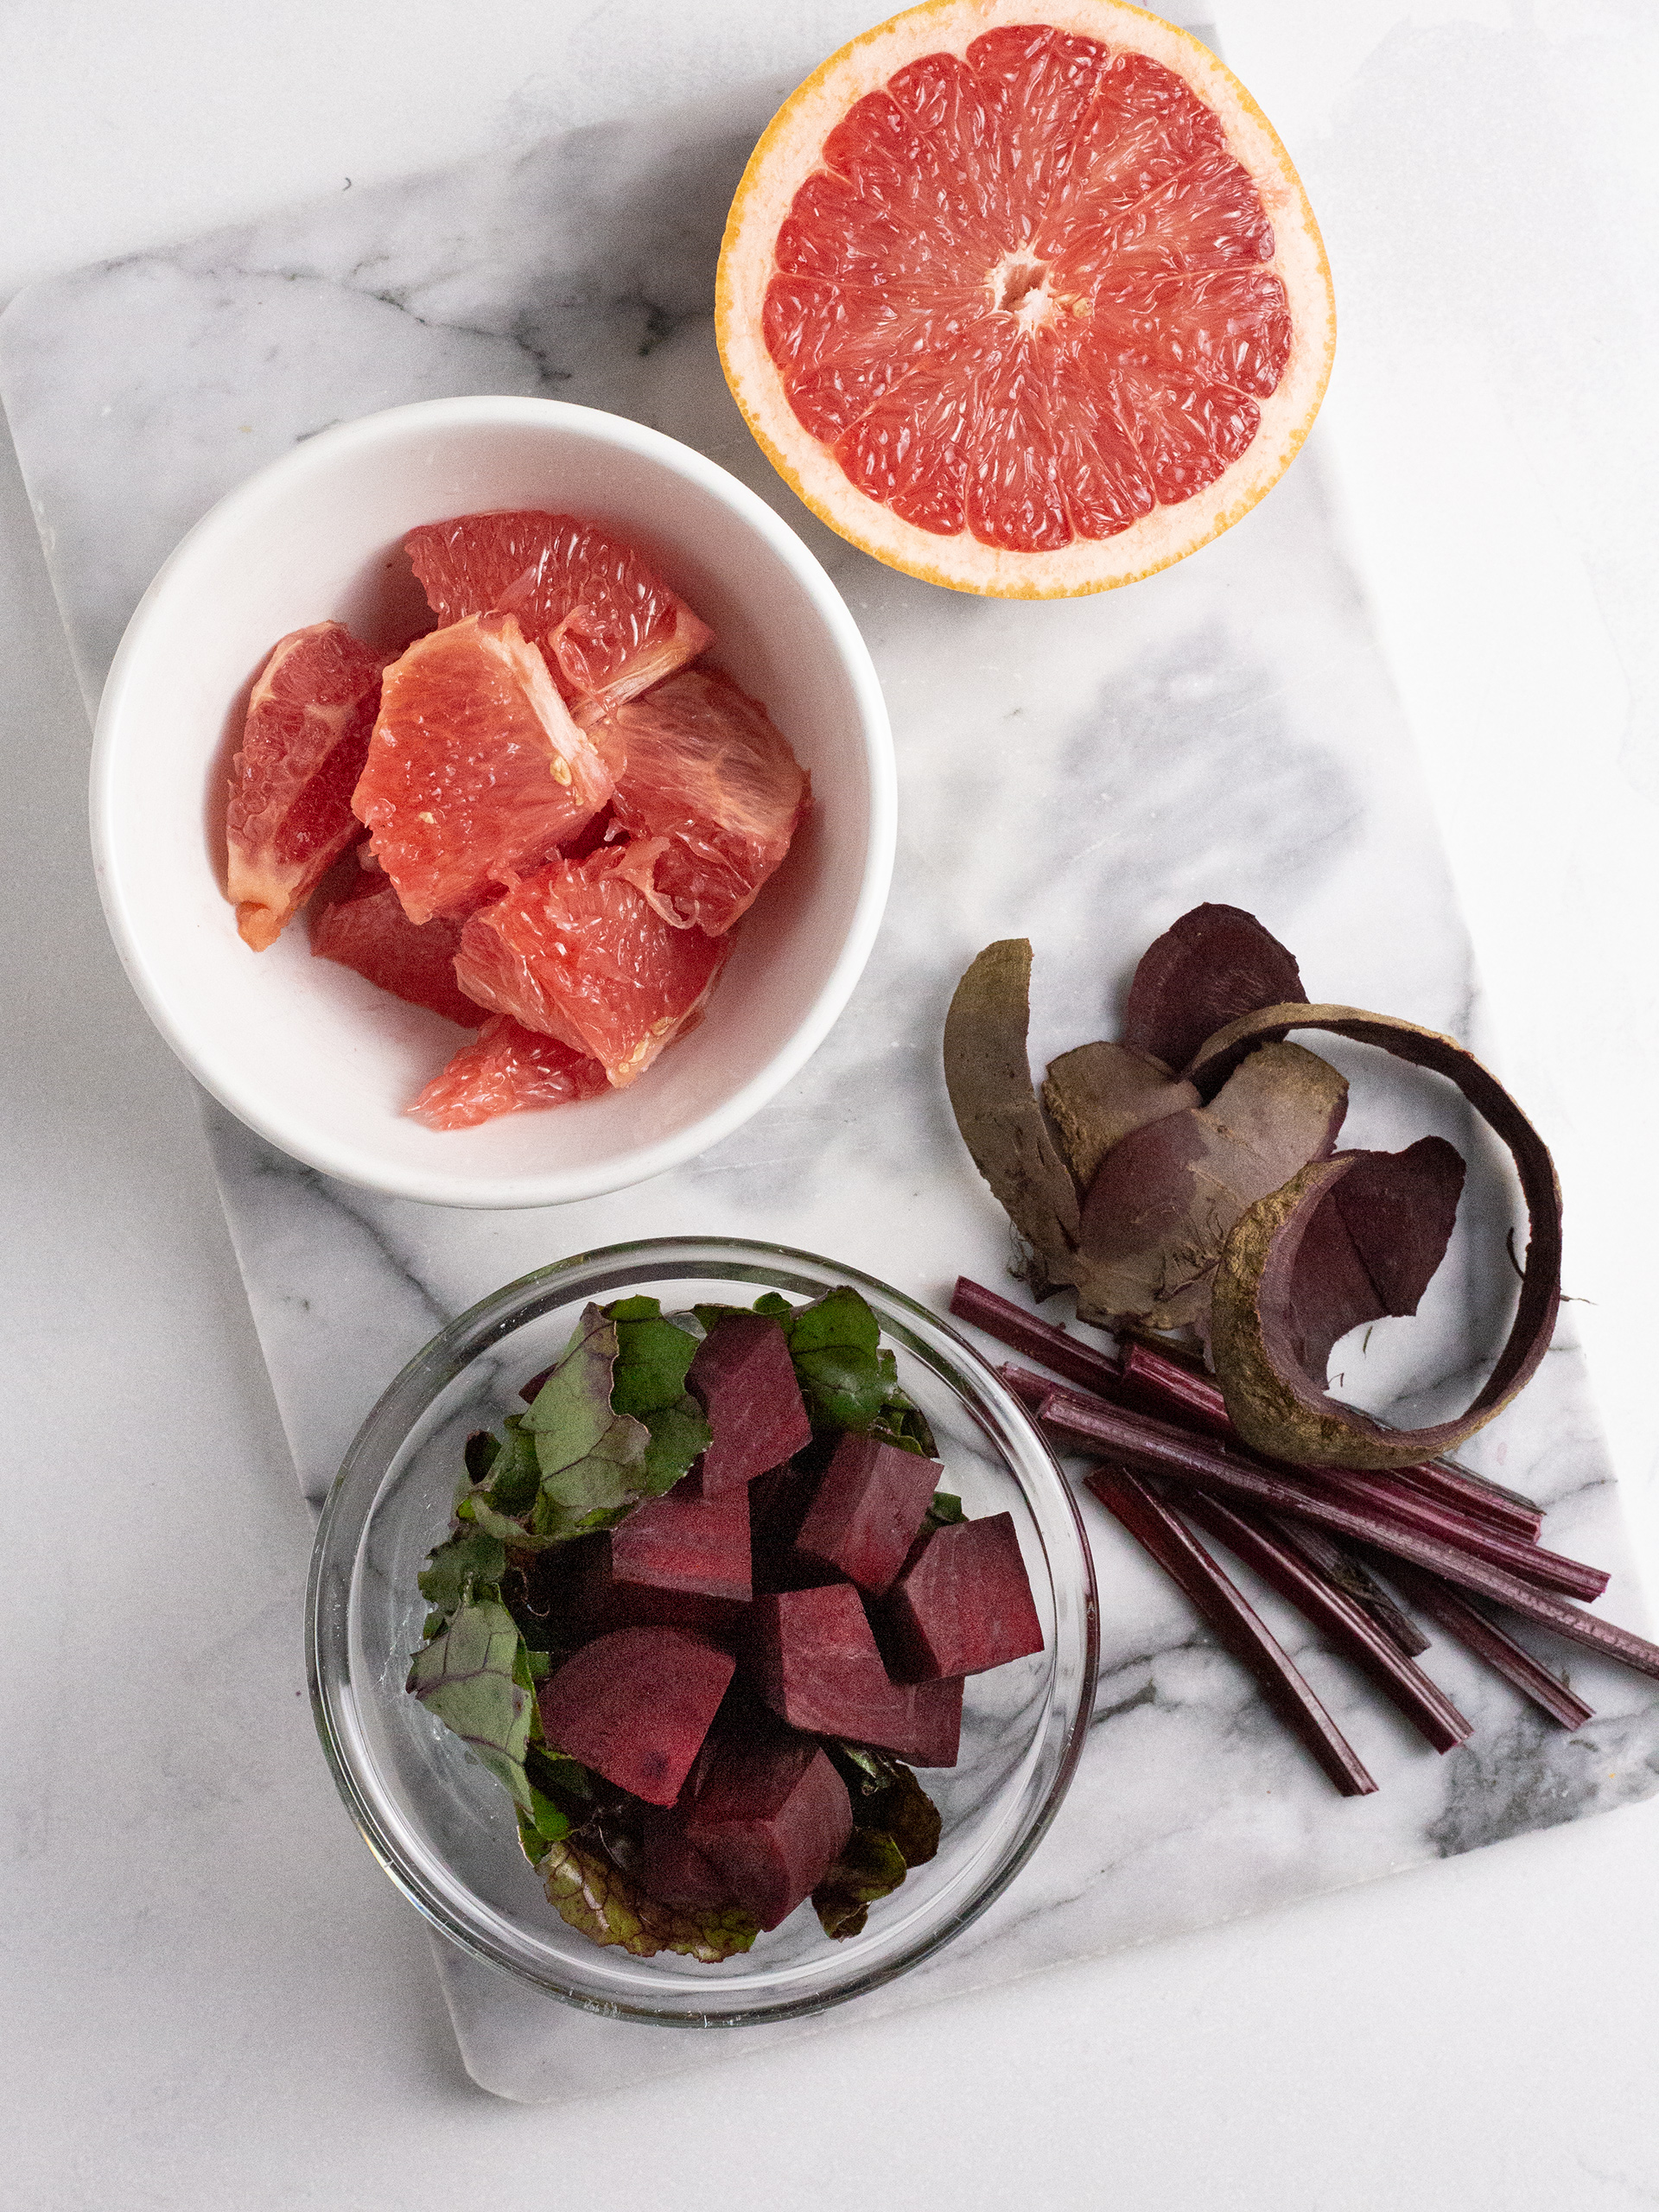 Peeled and sliced beets and grapefruit